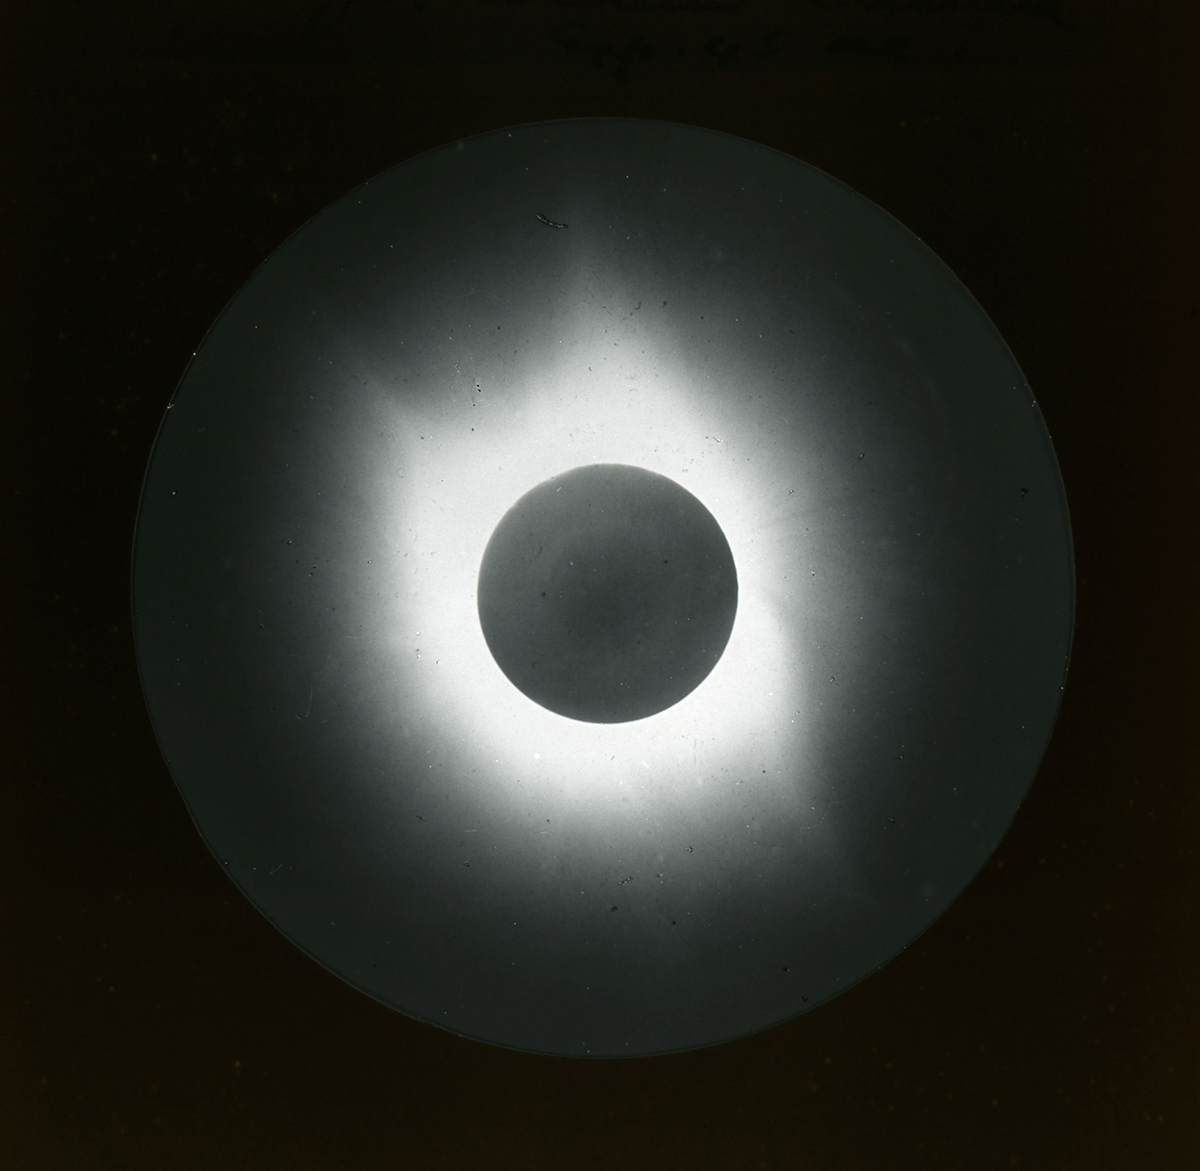 Black and white photo of the glowing white corona around the sun, which appears as a round dark disc, captured by the Einstein Camera during a total eclipse